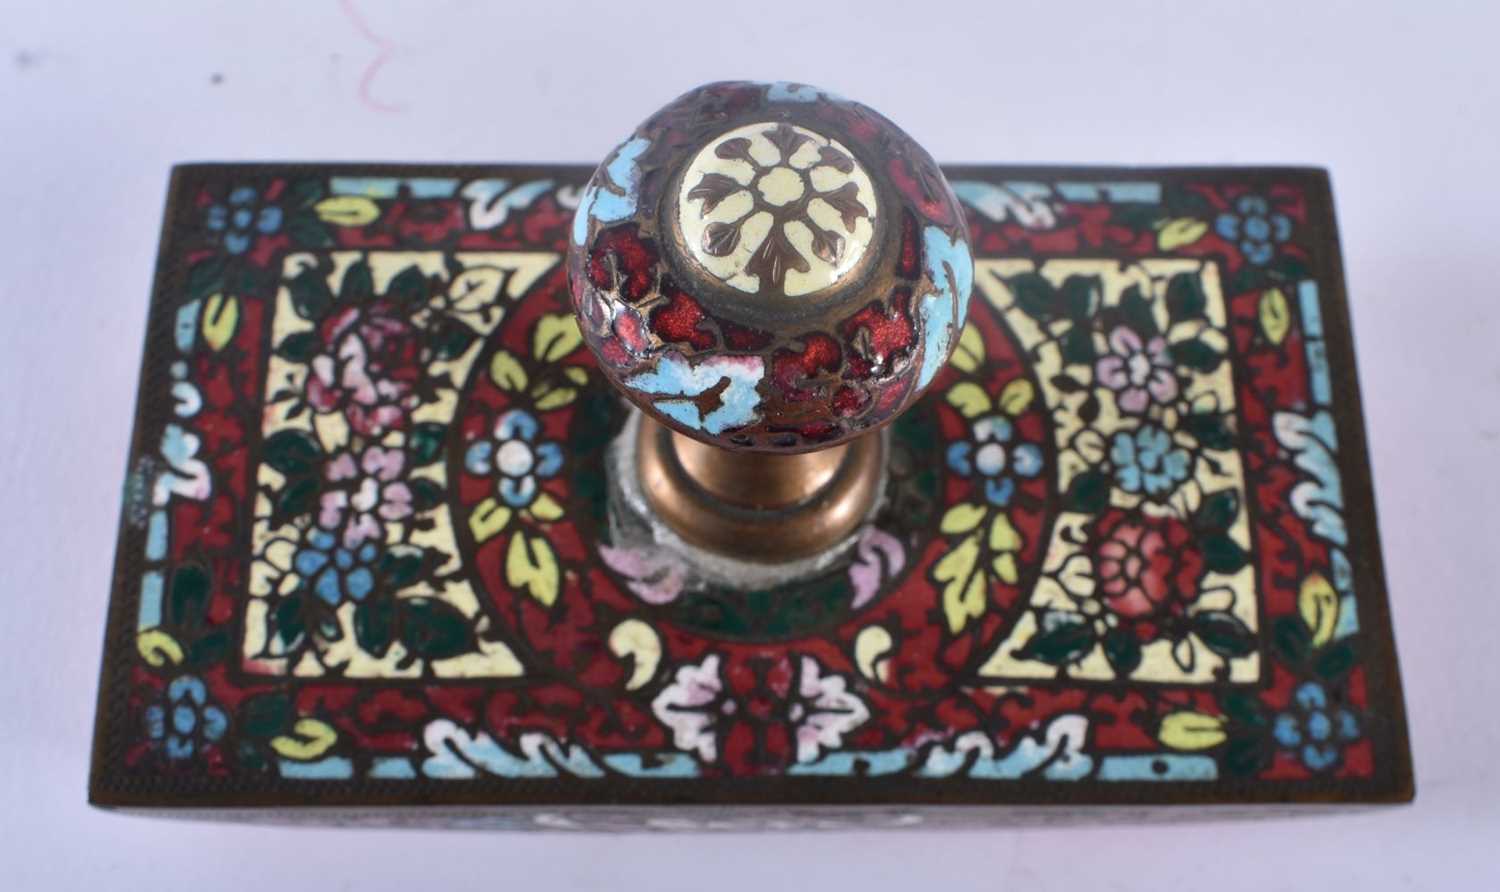 A 19TH CENTURY FRENCH CHAMPLEVE ENAMEL BRONZE DESK BLOTTER together with a Persian painted fan. - Image 4 of 5